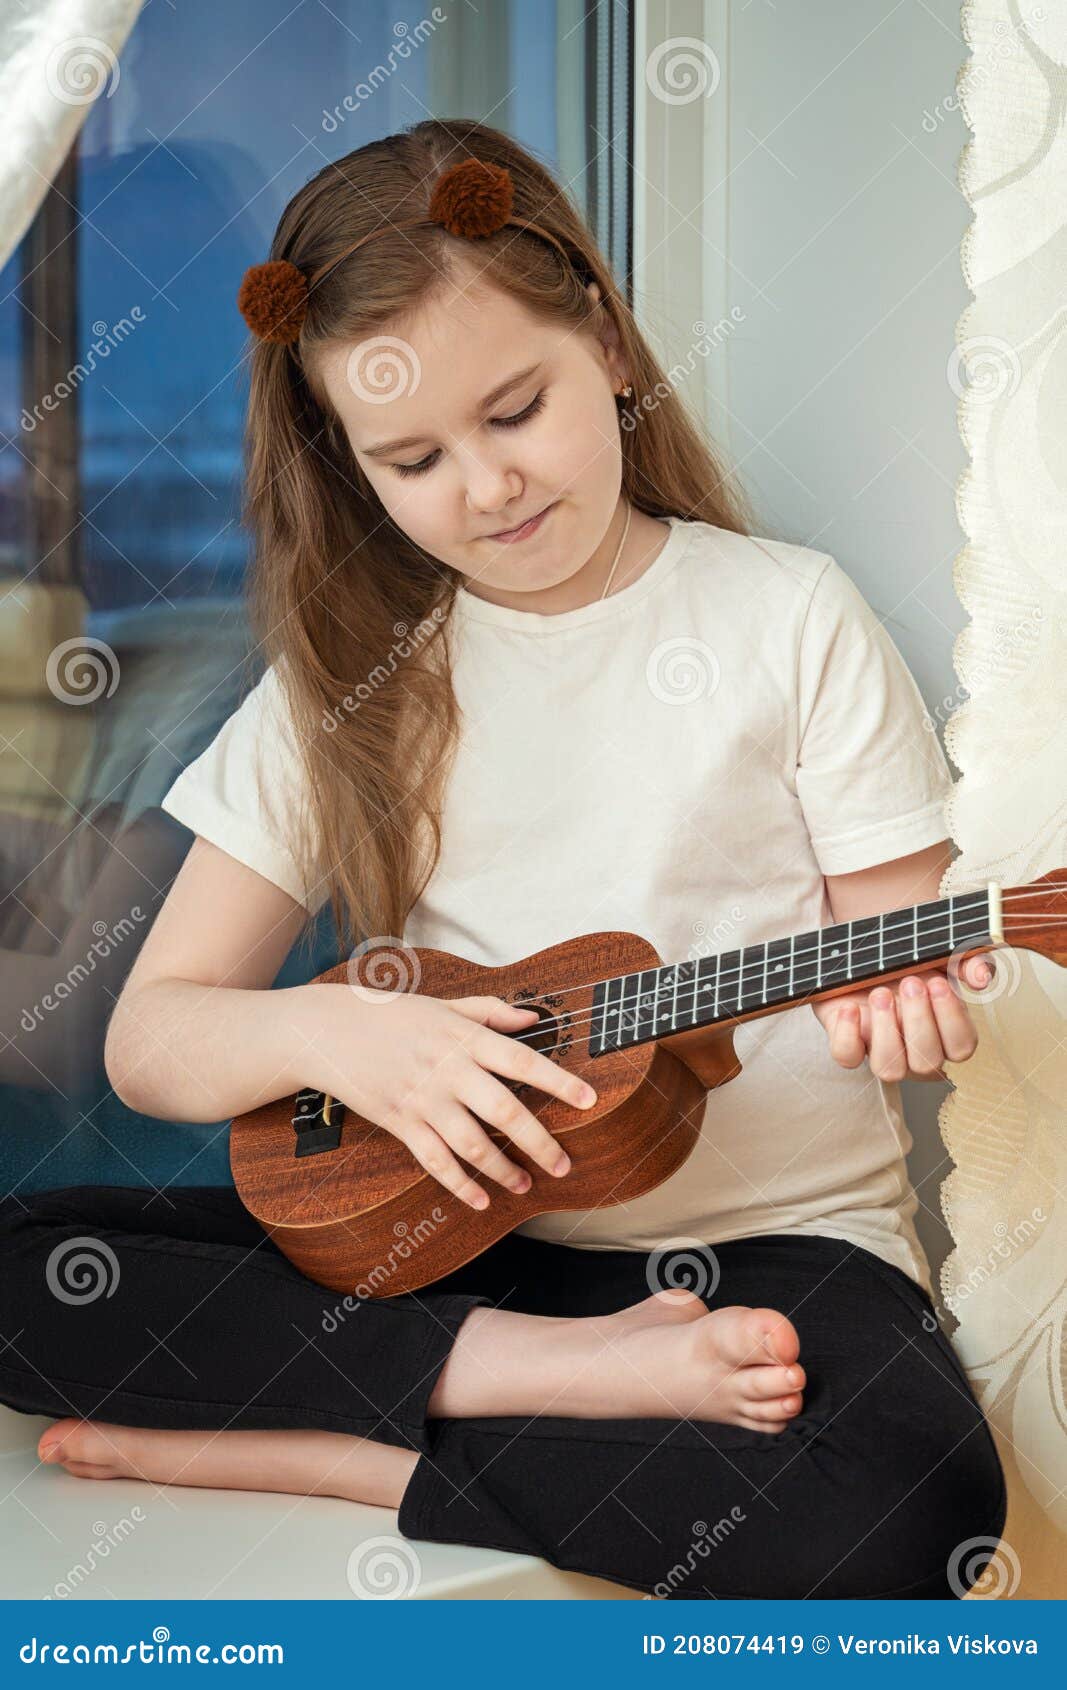 Little Cute Girl in White T-shirt and Black Leggings Sitting Inside of Home  and Playing Ukulele Stock Image - Image of cute, attractive: 208074419